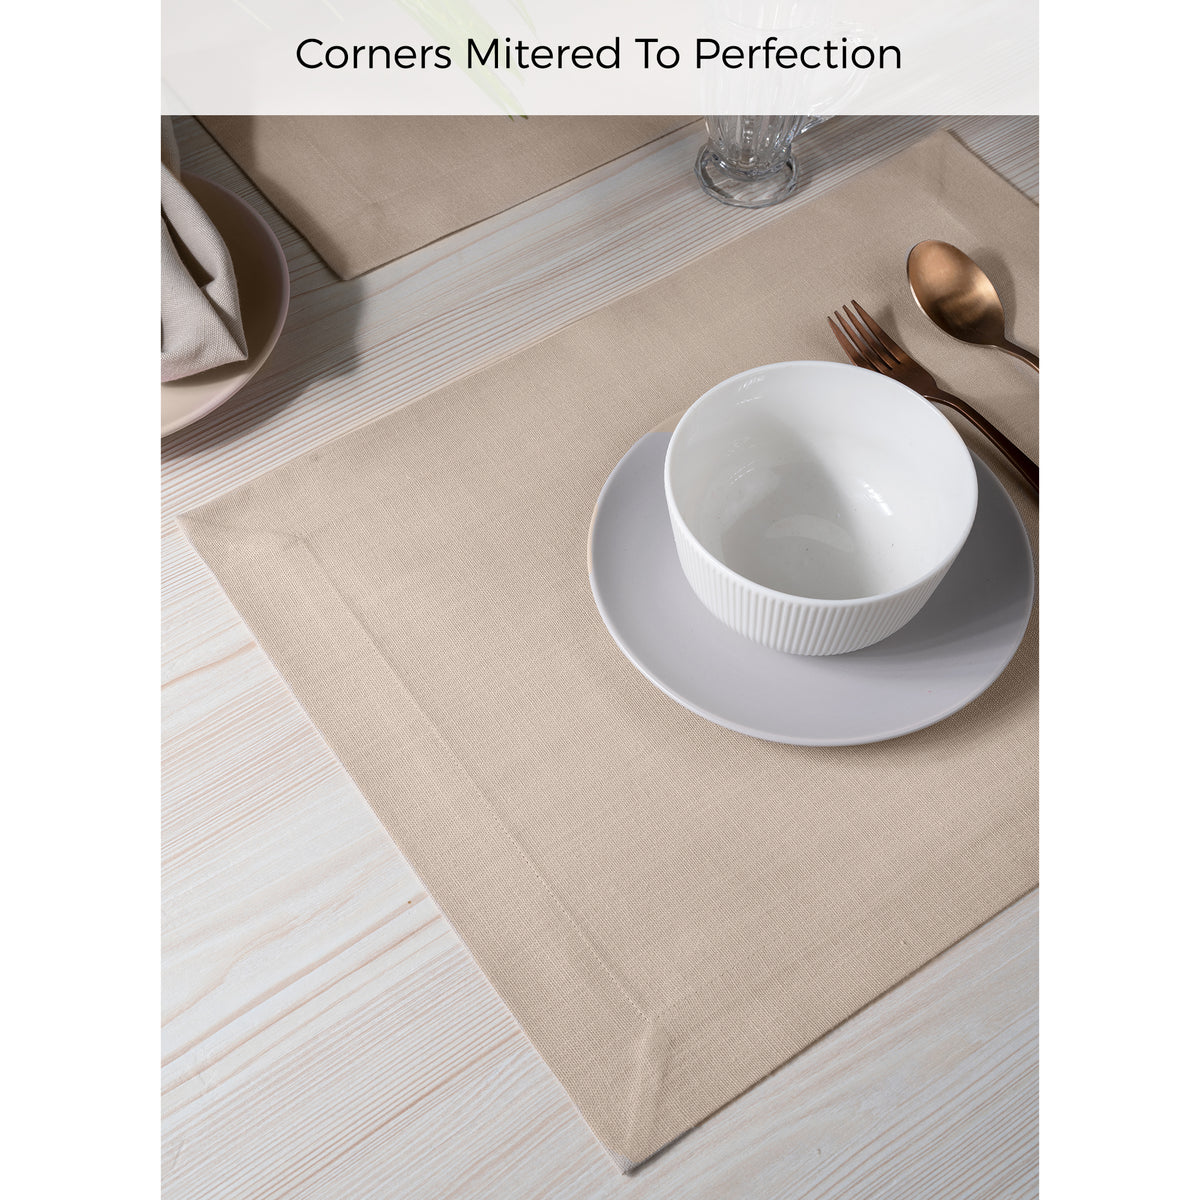 Natural Linen Textured Placemats 14 x 19 Inch Set of 4 - Mitered Corner